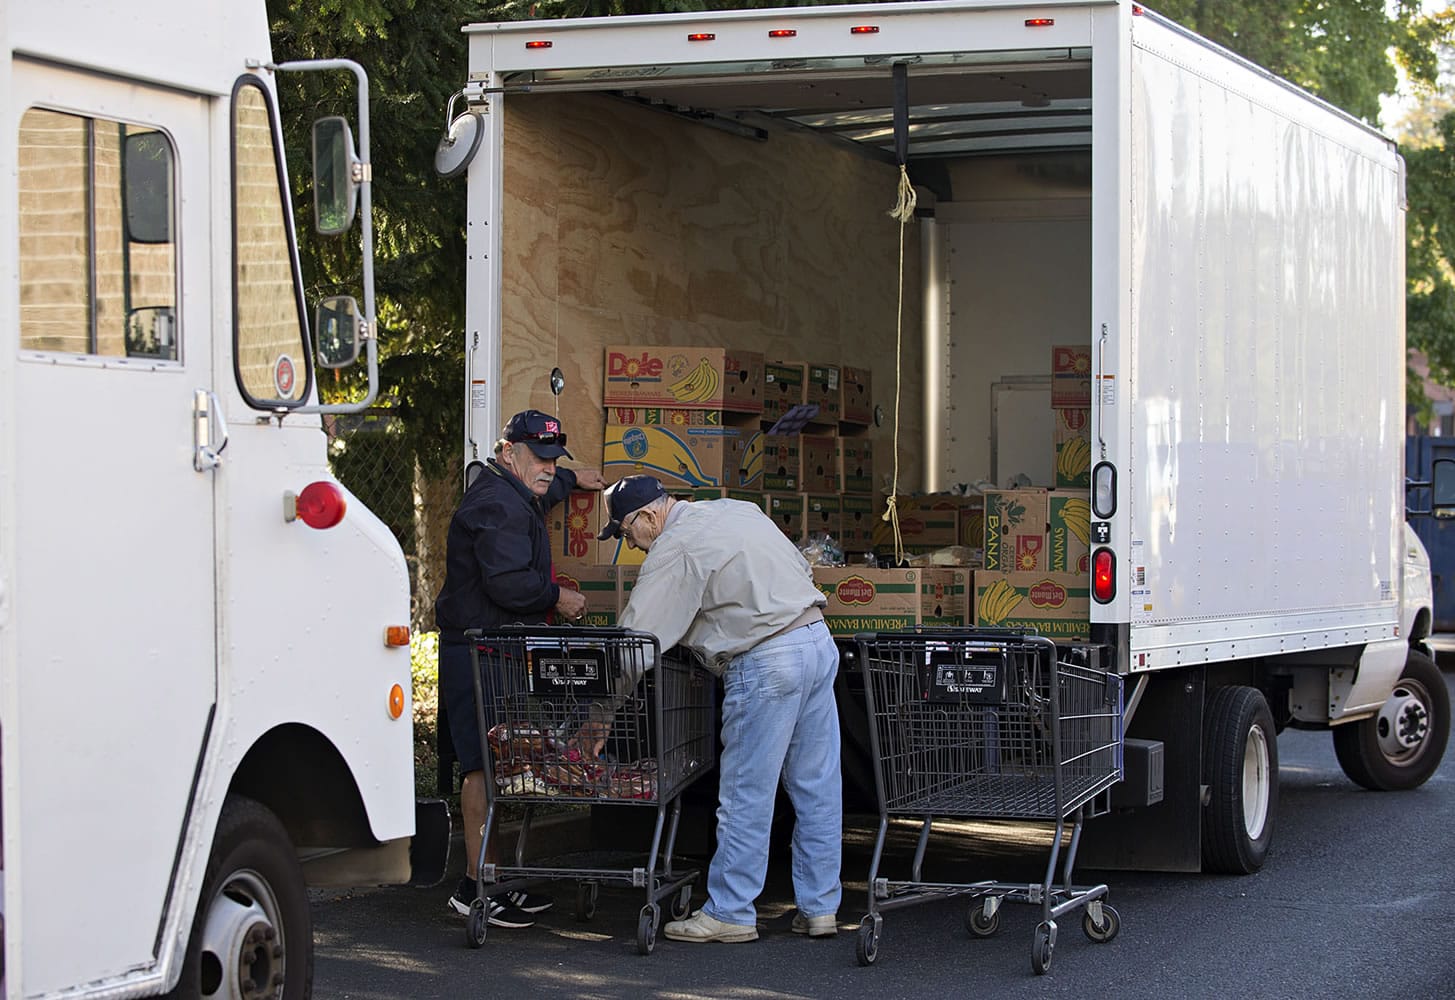 Salvation Army volunteers Greg Puppo, left, and Bill Davis, load up donated bakery items into their truck Tuesday at the Salmon Creek Safeway.